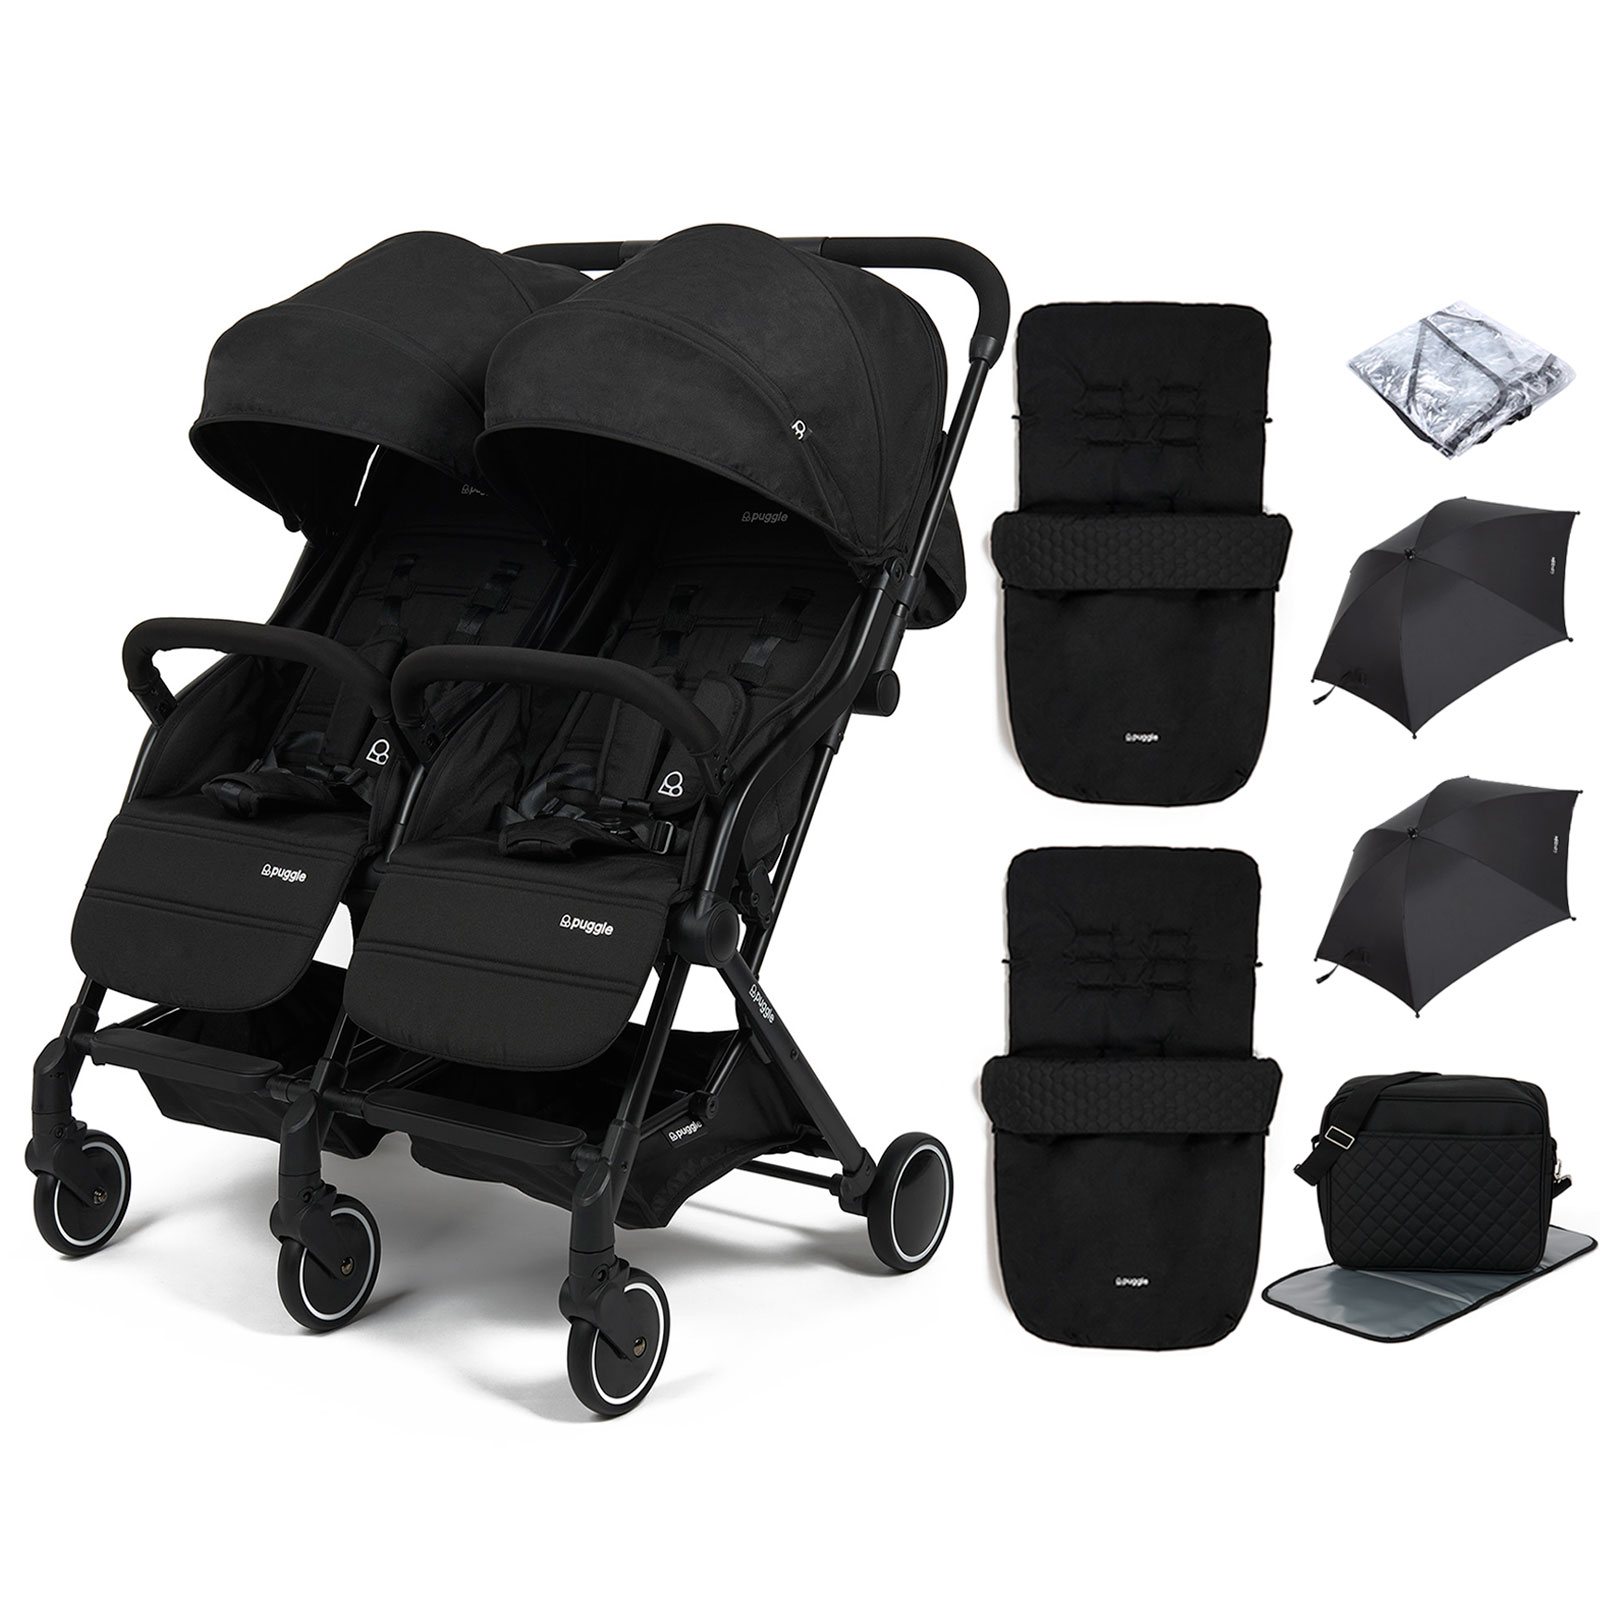 Puggle City Traveller Compact Fold Twin Pushchair with 2 Footmuffs, 2 Parasols & Changing Bag – Storm Black